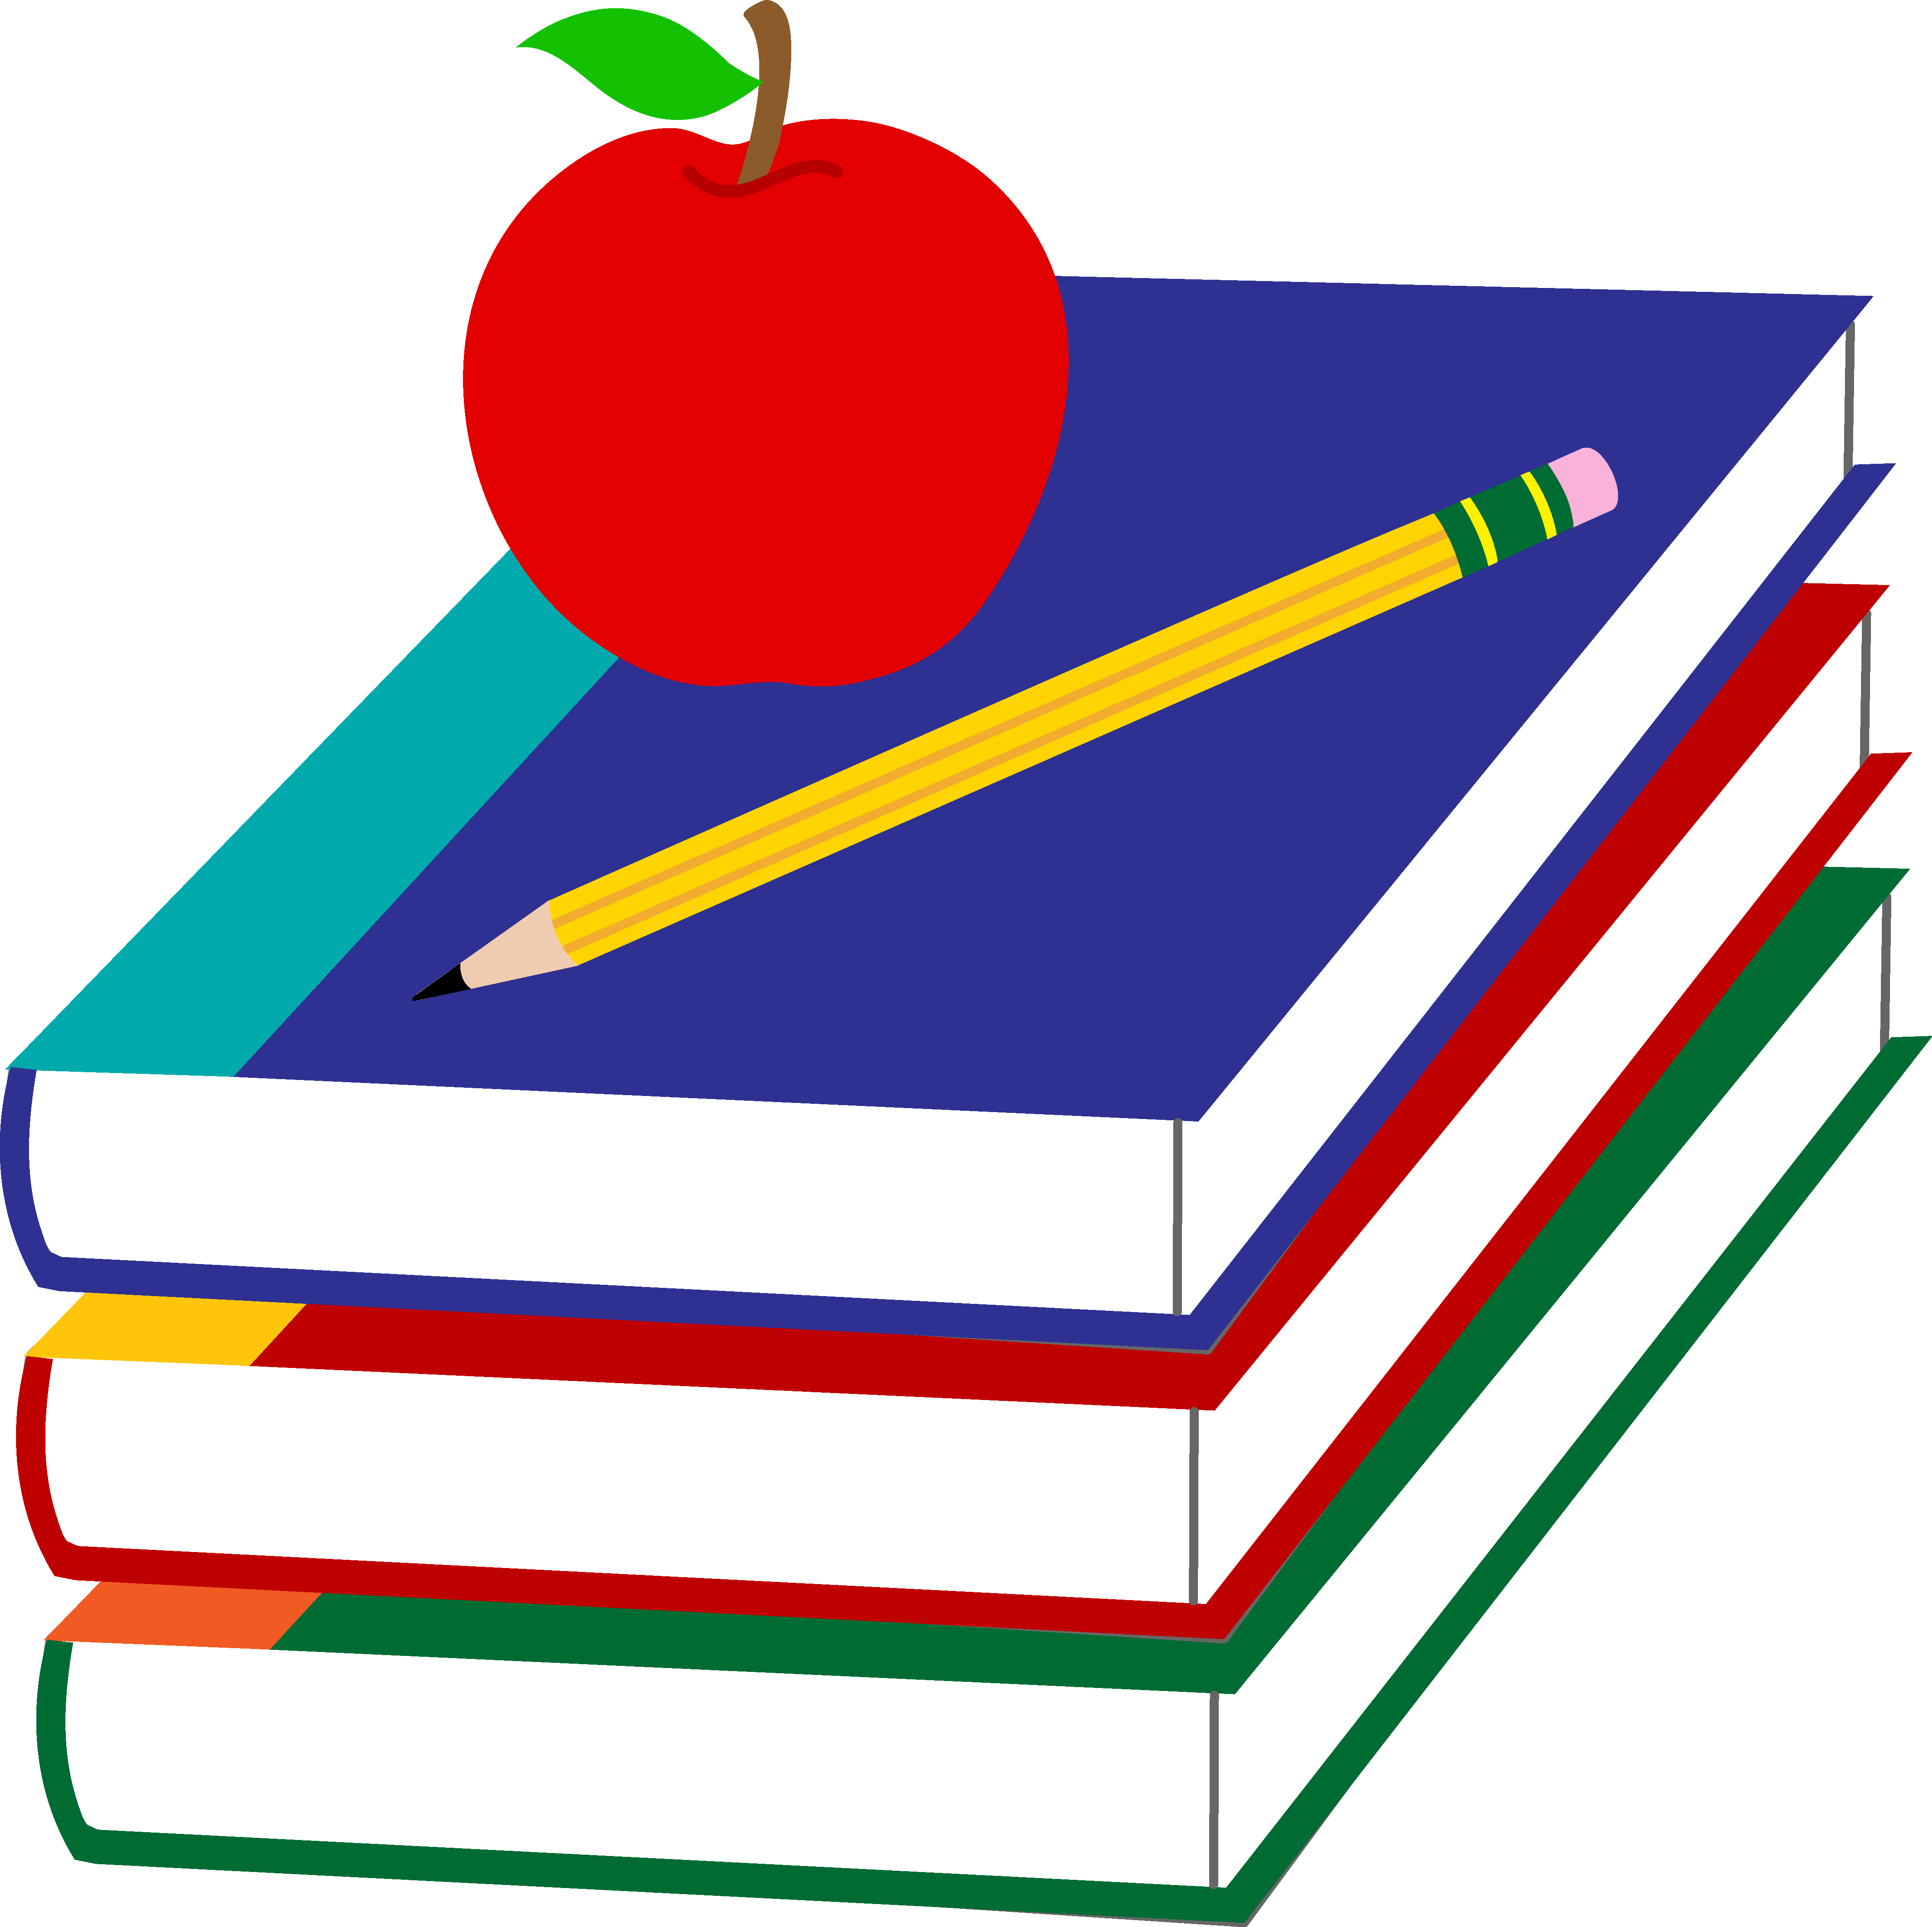 And book png transparent. Ruler clipart apple